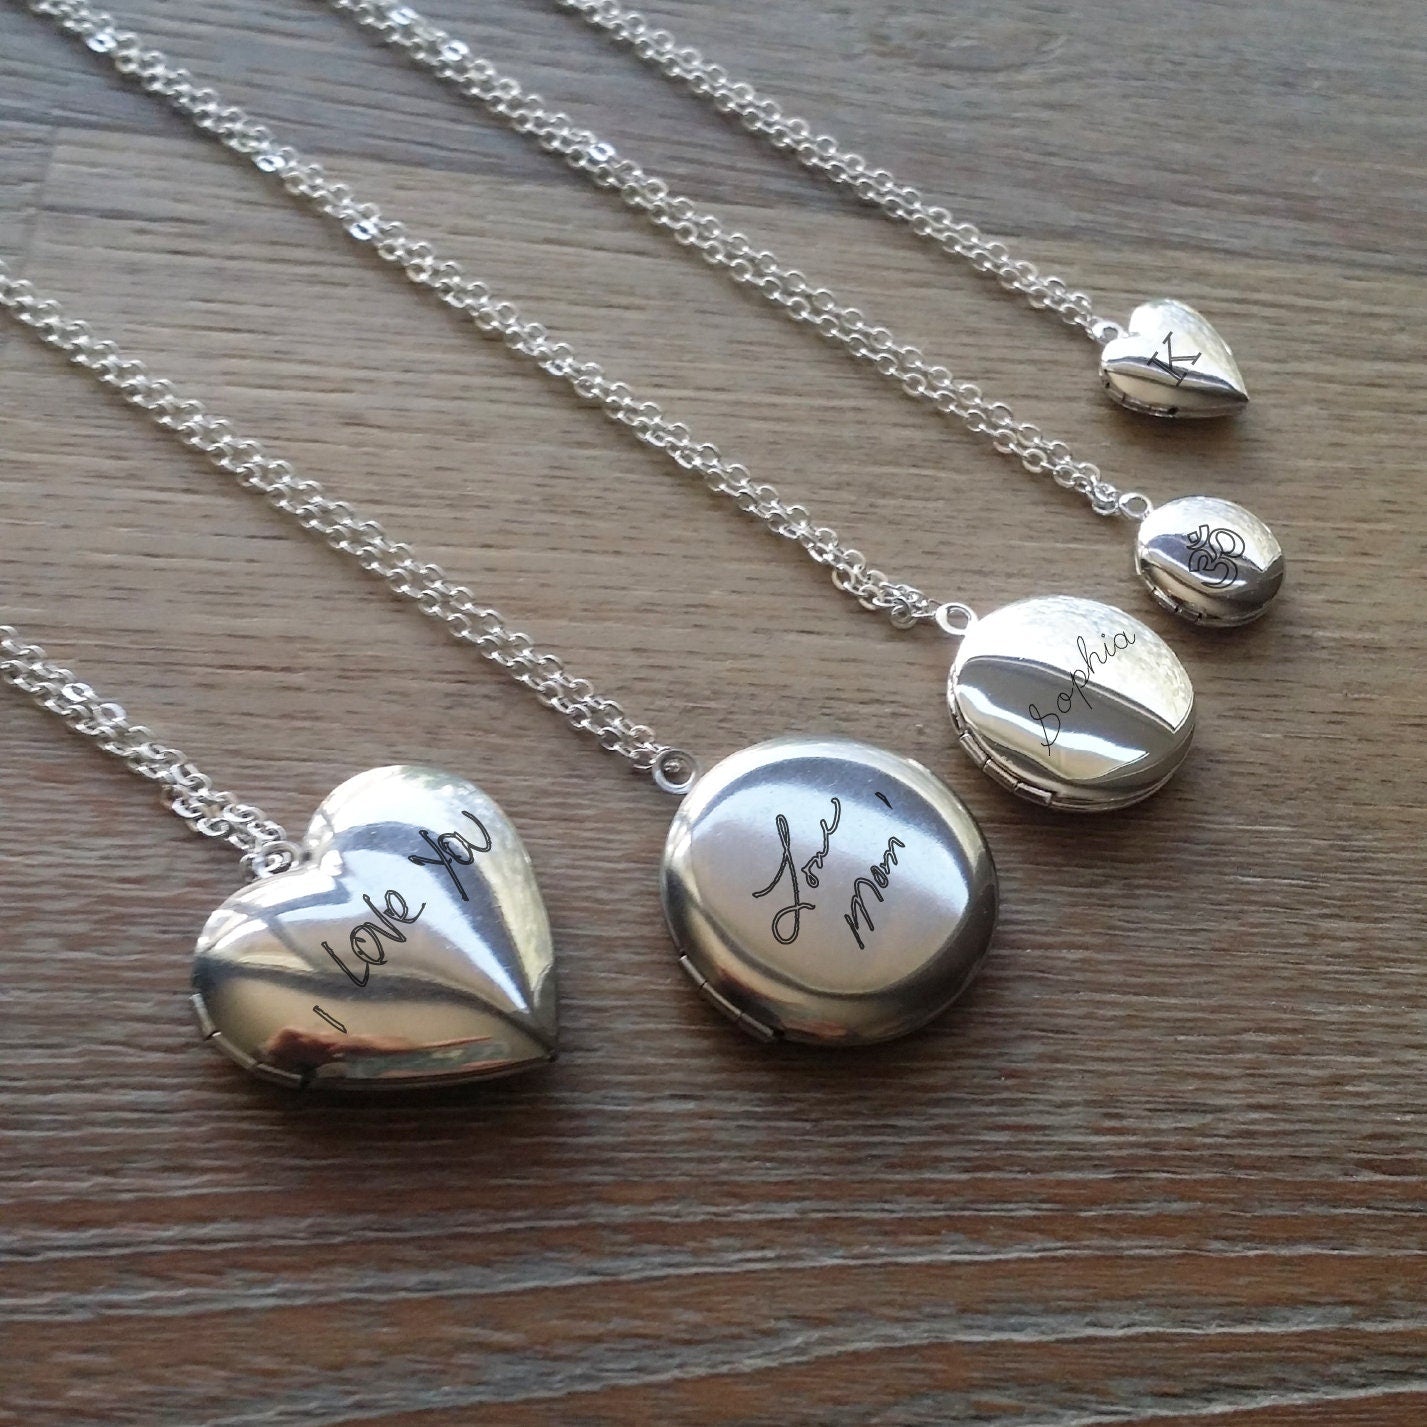 Actual handwriting engraved on Locket, in silver/rose/gold pendant